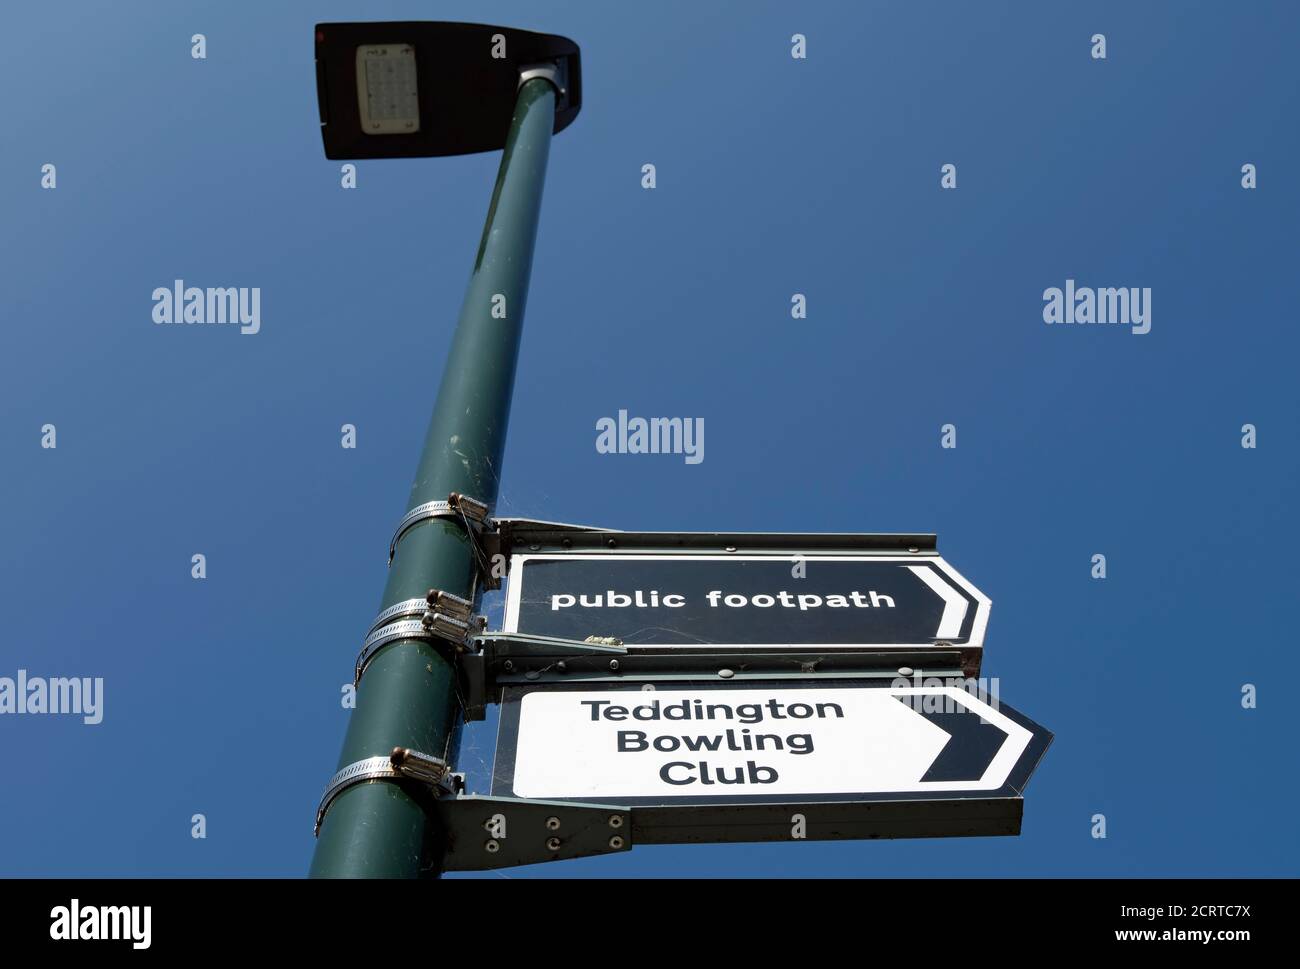 lamppost with right pointing signs for a public footpath and teddington bowling club, teddington, middlesex, england Stock Photo